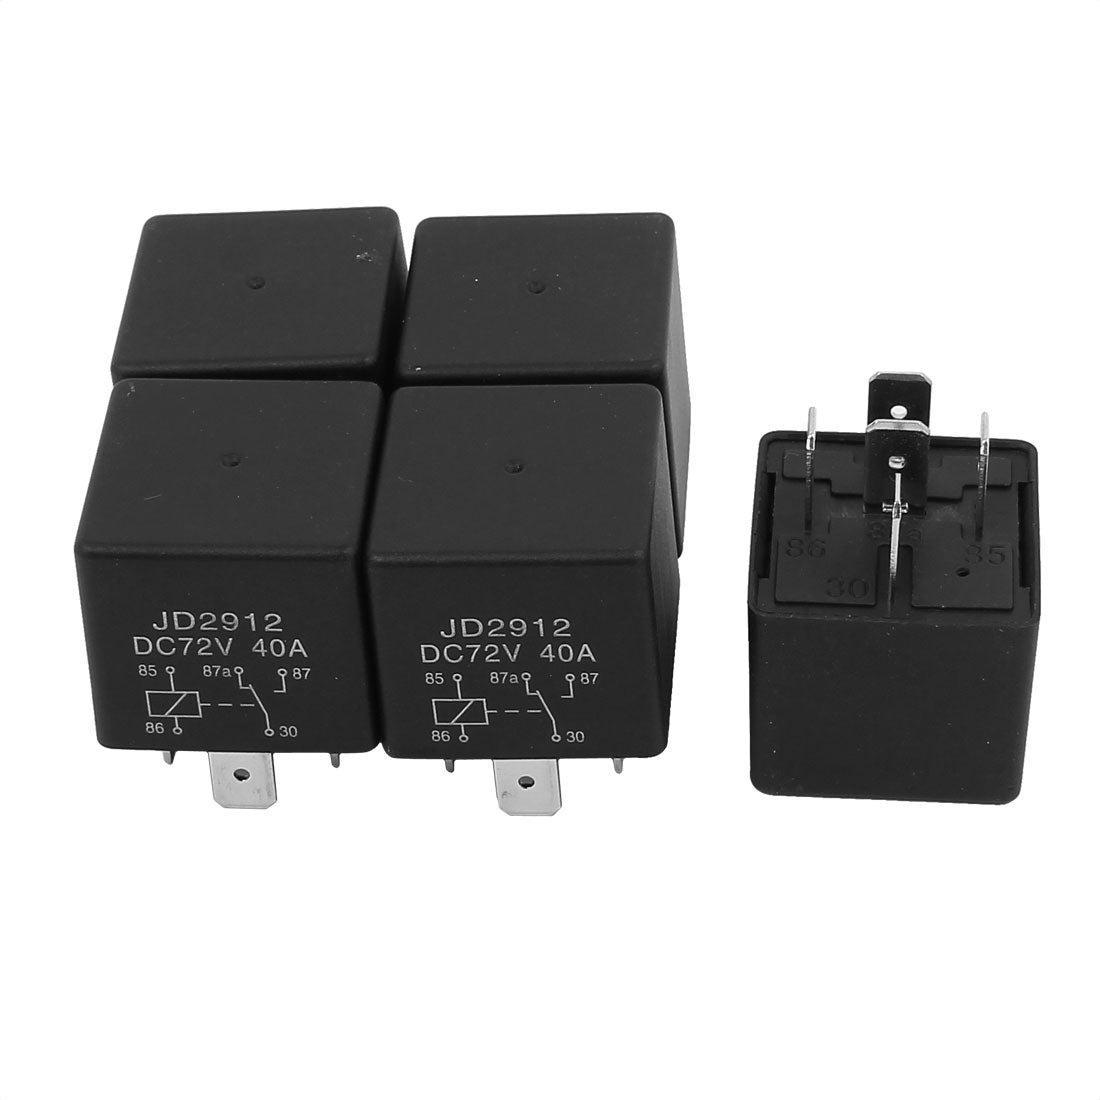 uxcell Uxcell JD2912 DC 72V Coil 40A 5 Pins SPDT Security Power Relay 5pcs